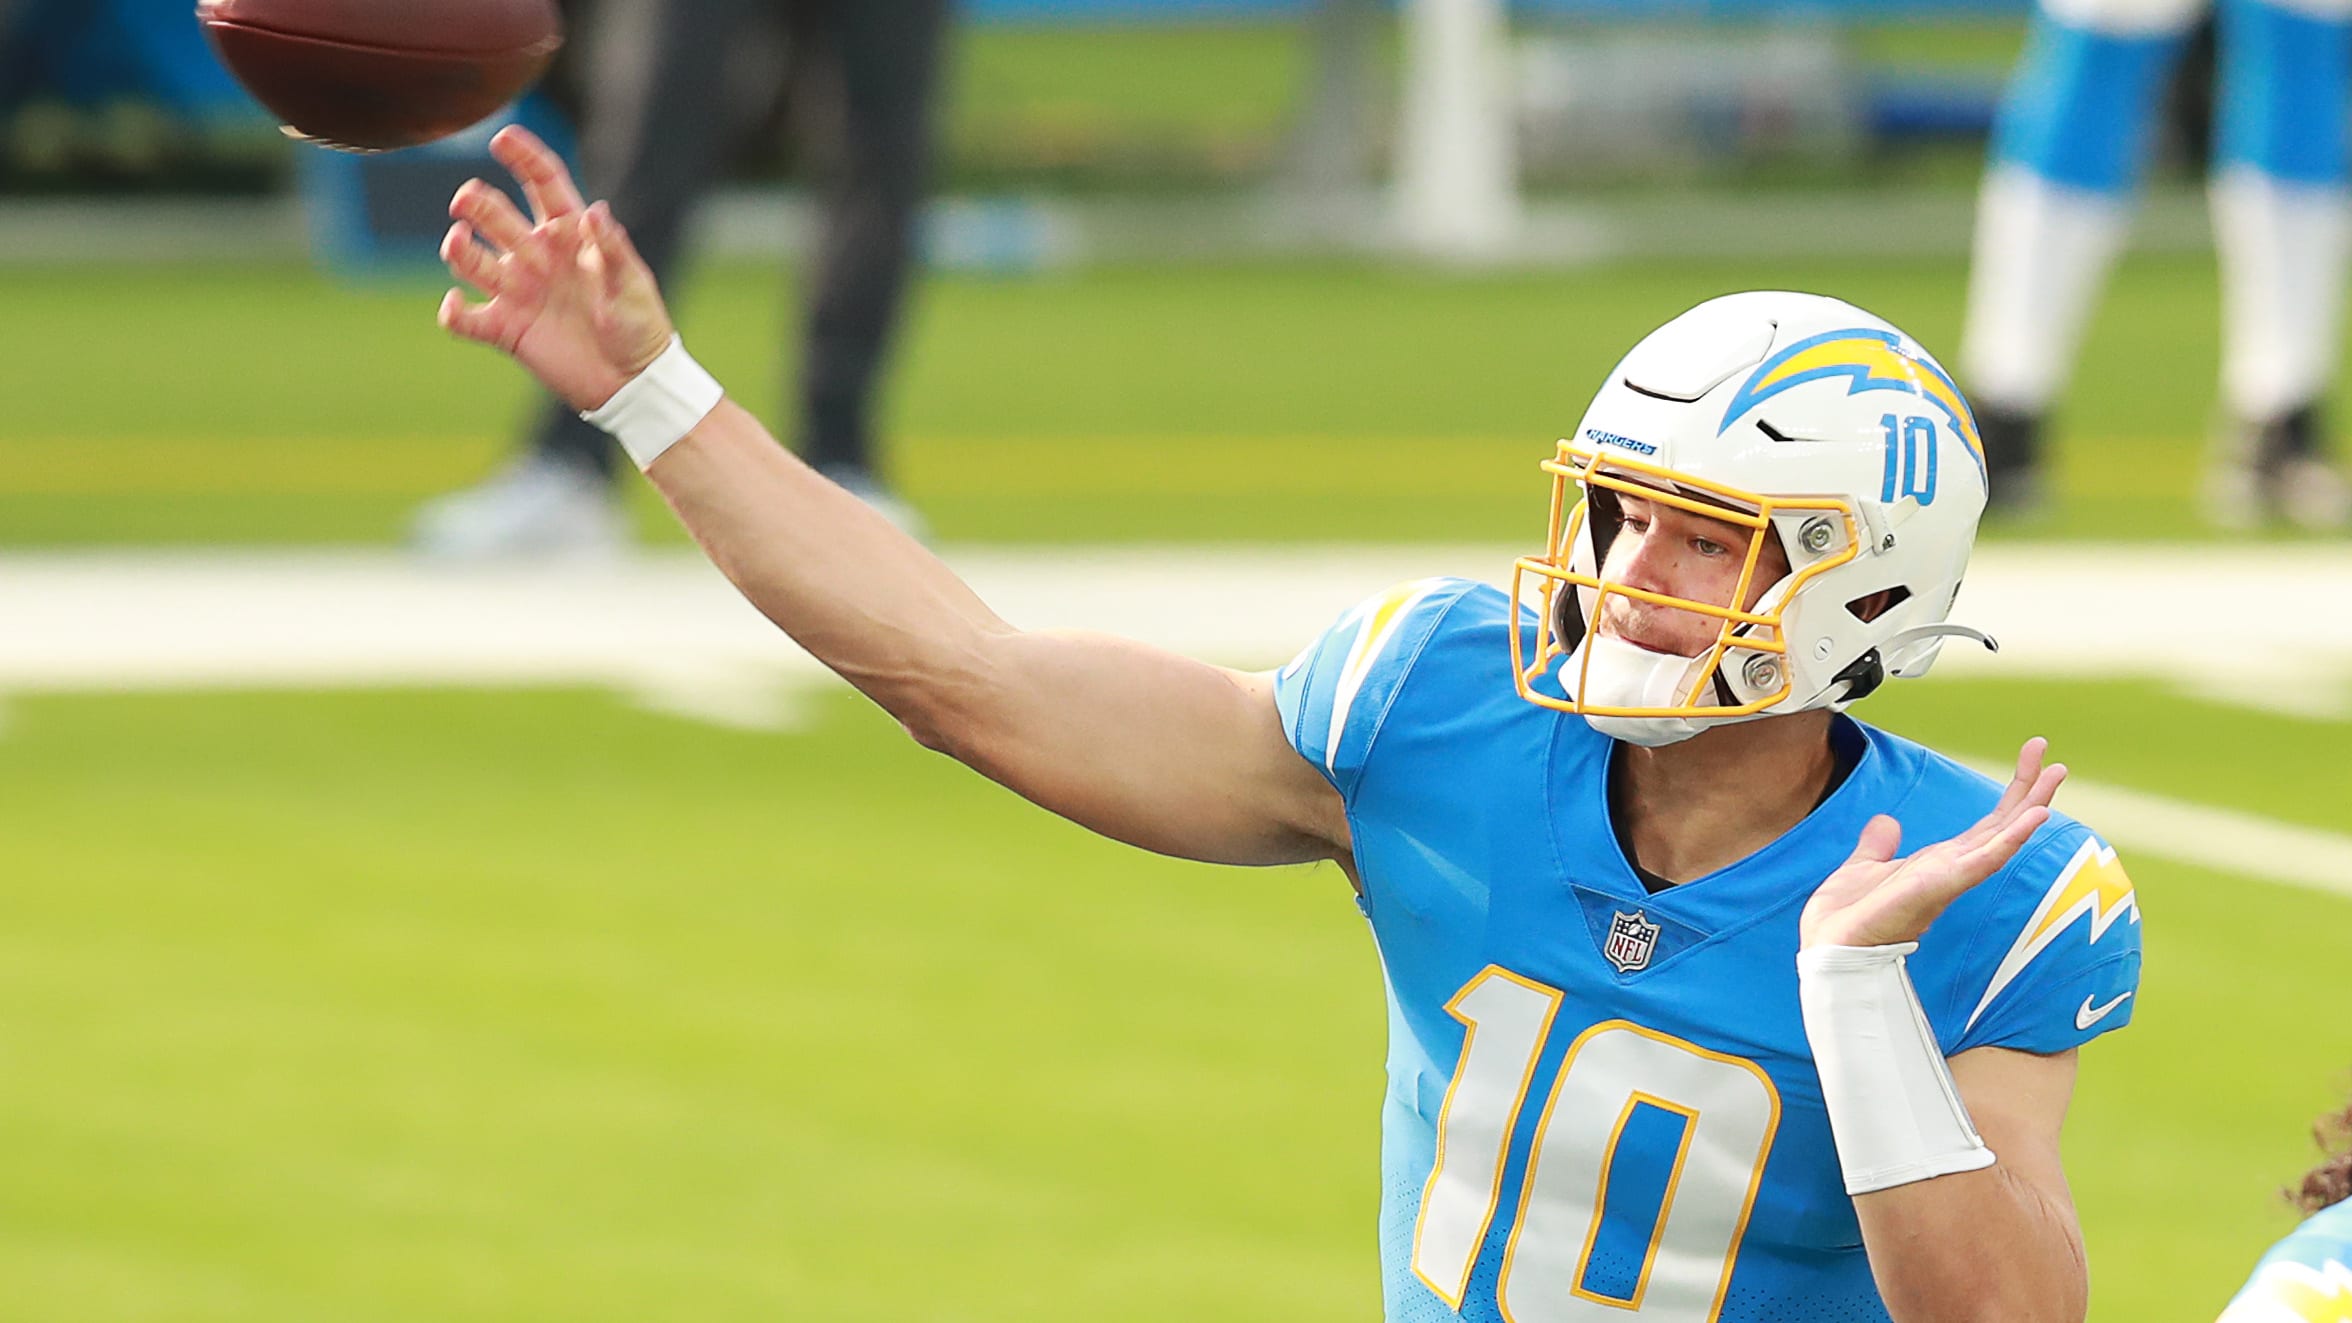 Los Angeles Chargers Fantasy Football Team Names (Updated 2022)